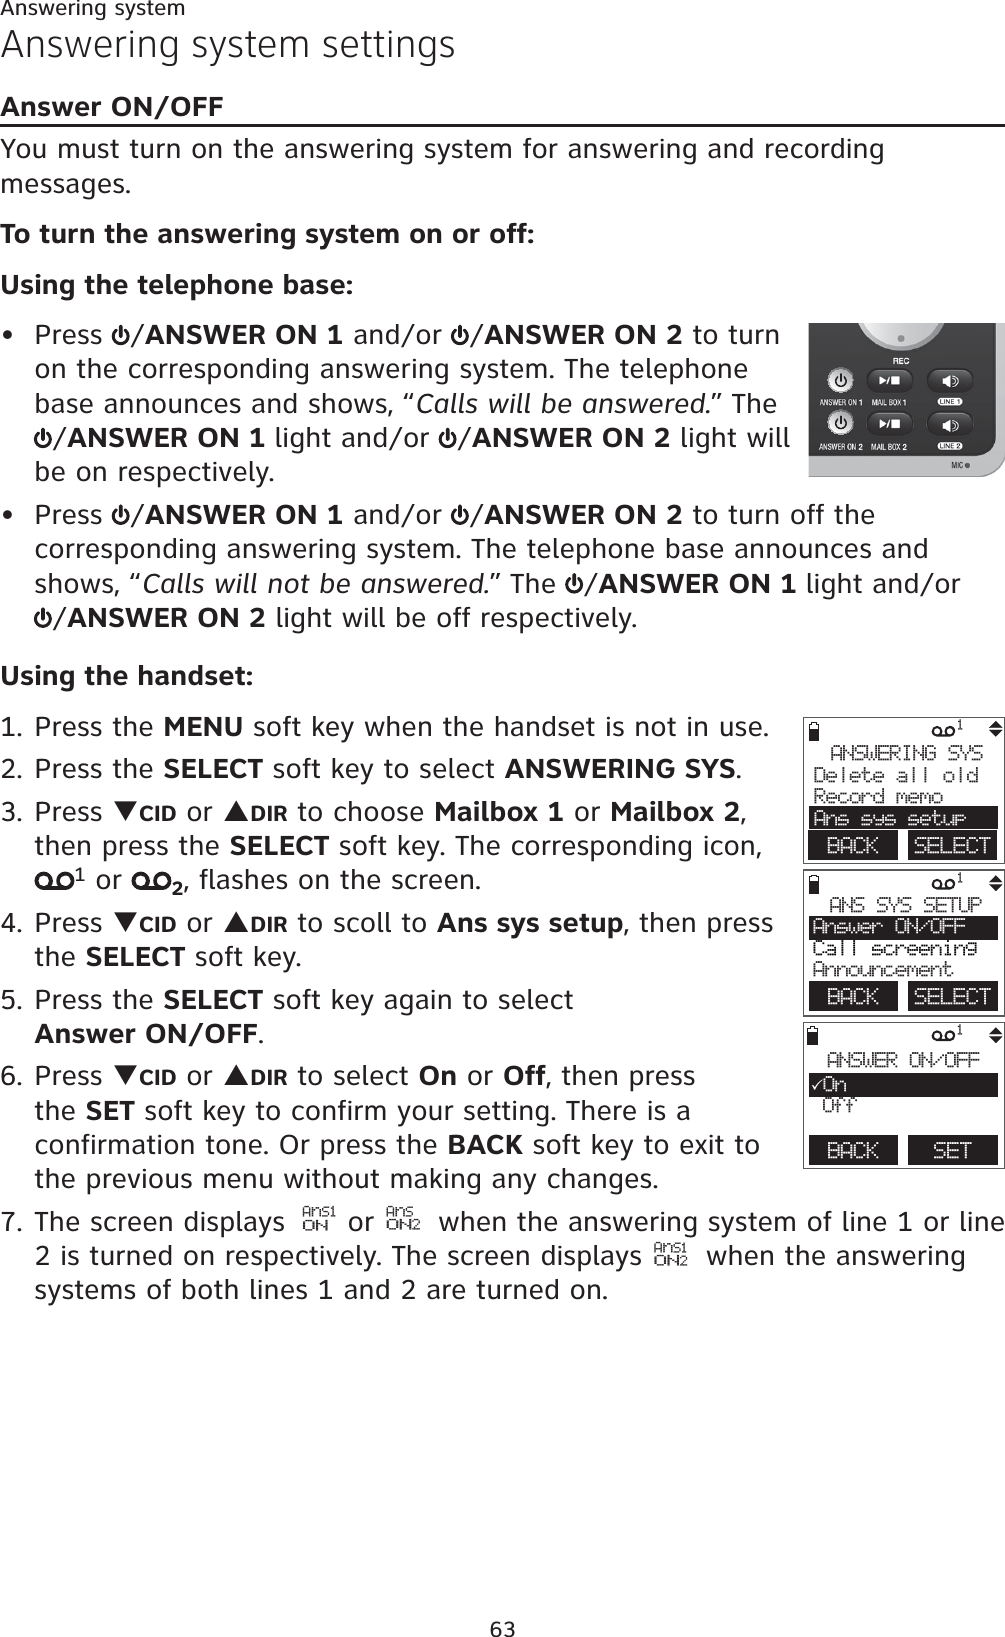 63Answering systemAnswering system settingsAnswer ON/OFFYou must turn on the answering system for answering and recording messages.To turn the answering system on or off:Using the telephone base:Press  /ANSWER ON 1 and/or  /ANSWER ON 2 to turn on the corresponding answering system. The telephone base announces and shows, “Calls will be answered.” The /ANSWER ON 1 light and/or  /ANSWER ON 2 light will be on respectively.Press  /ANSWER ON 1 and/or  /ANSWER ON 2 to turn off the corresponding answering system. The telephone base announces and shows, “Calls will not be answered.” The  /ANSWER ON 1 light and/or/ANSWER ON 2 light will be off respectively.Using the handset:1. Press the MENU soft key when the handset is not in use.2. Press the SELECT soft key to select ANSWERING SYS.3. Press TCID or SDIR to choose Mailbox 1 or Mailbox 2,then press the SELECT soft key. The corresponding icon, 1 or  2, flashes on the screen.4. Press TCID or SDIR to scoll to Ans sys setup, then press the SELECT soft key. 5. Press the SELECT soft key again to select             Answer ON/OFF.6. Press TCID or SDIR to select On or Off, then press the SET soft key to confirm your setting. There is a confirmation tone. Or press the BACK soft key to exit to the previous menu without making any changes.7. The screen displays  AnS1ON or AnSON2 when the answering system of line 1 or line 2 is turned on respectively. The screen displays   AnS1ON2 when the answering systems of both lines 1 and 2 are turned on. ••1ANSWERING SYSDelete all oldRecord memoAns sys setupBACK    SELECT1ANS SYS SETUPAnswer ON/OFFCall screeningAnnouncementBACK    SELECT1BACK    SETANSWER ON/OFF3On Off